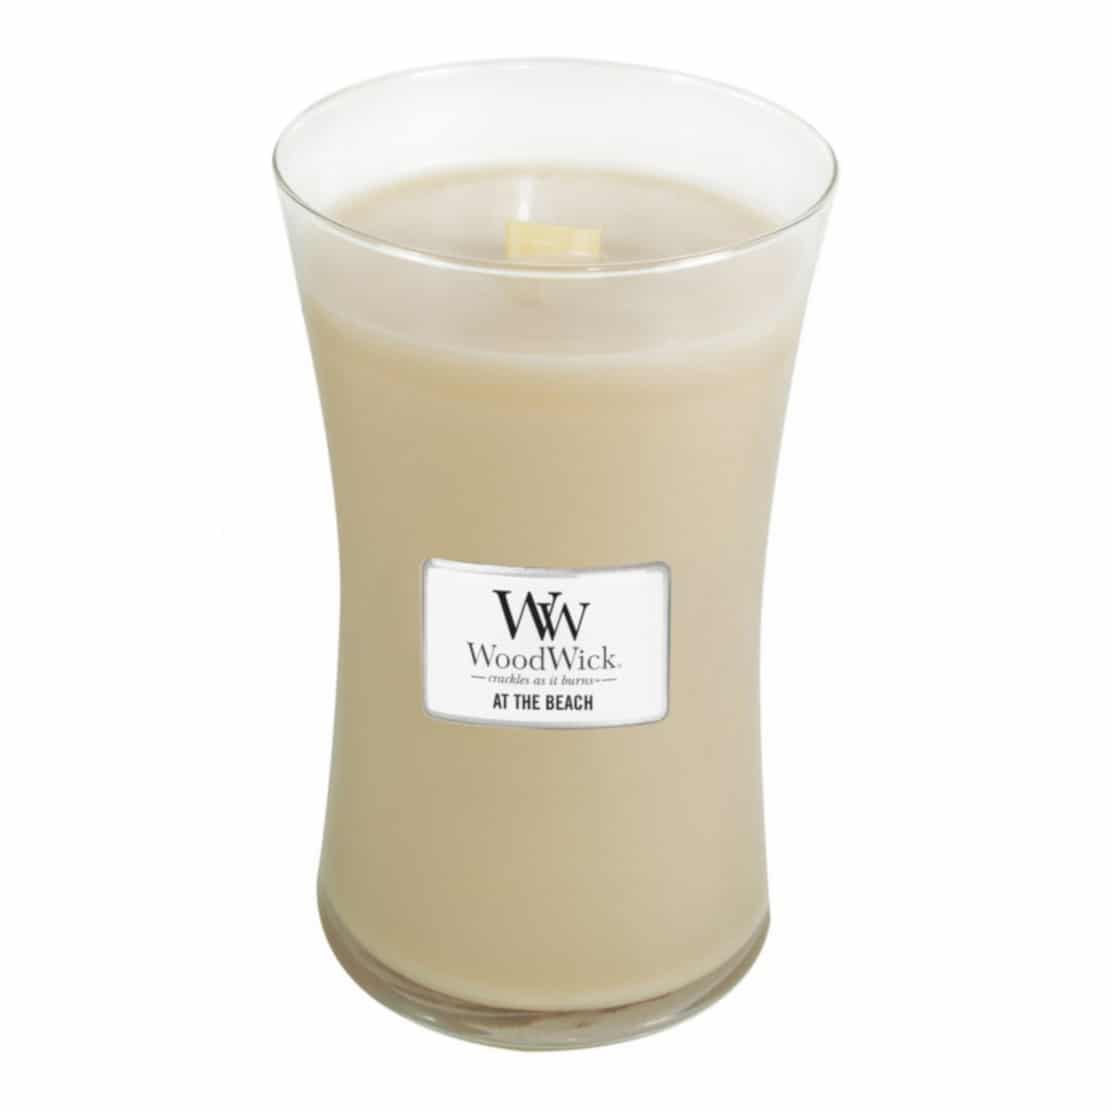 Woodwick At The Beach Large Jar Candle